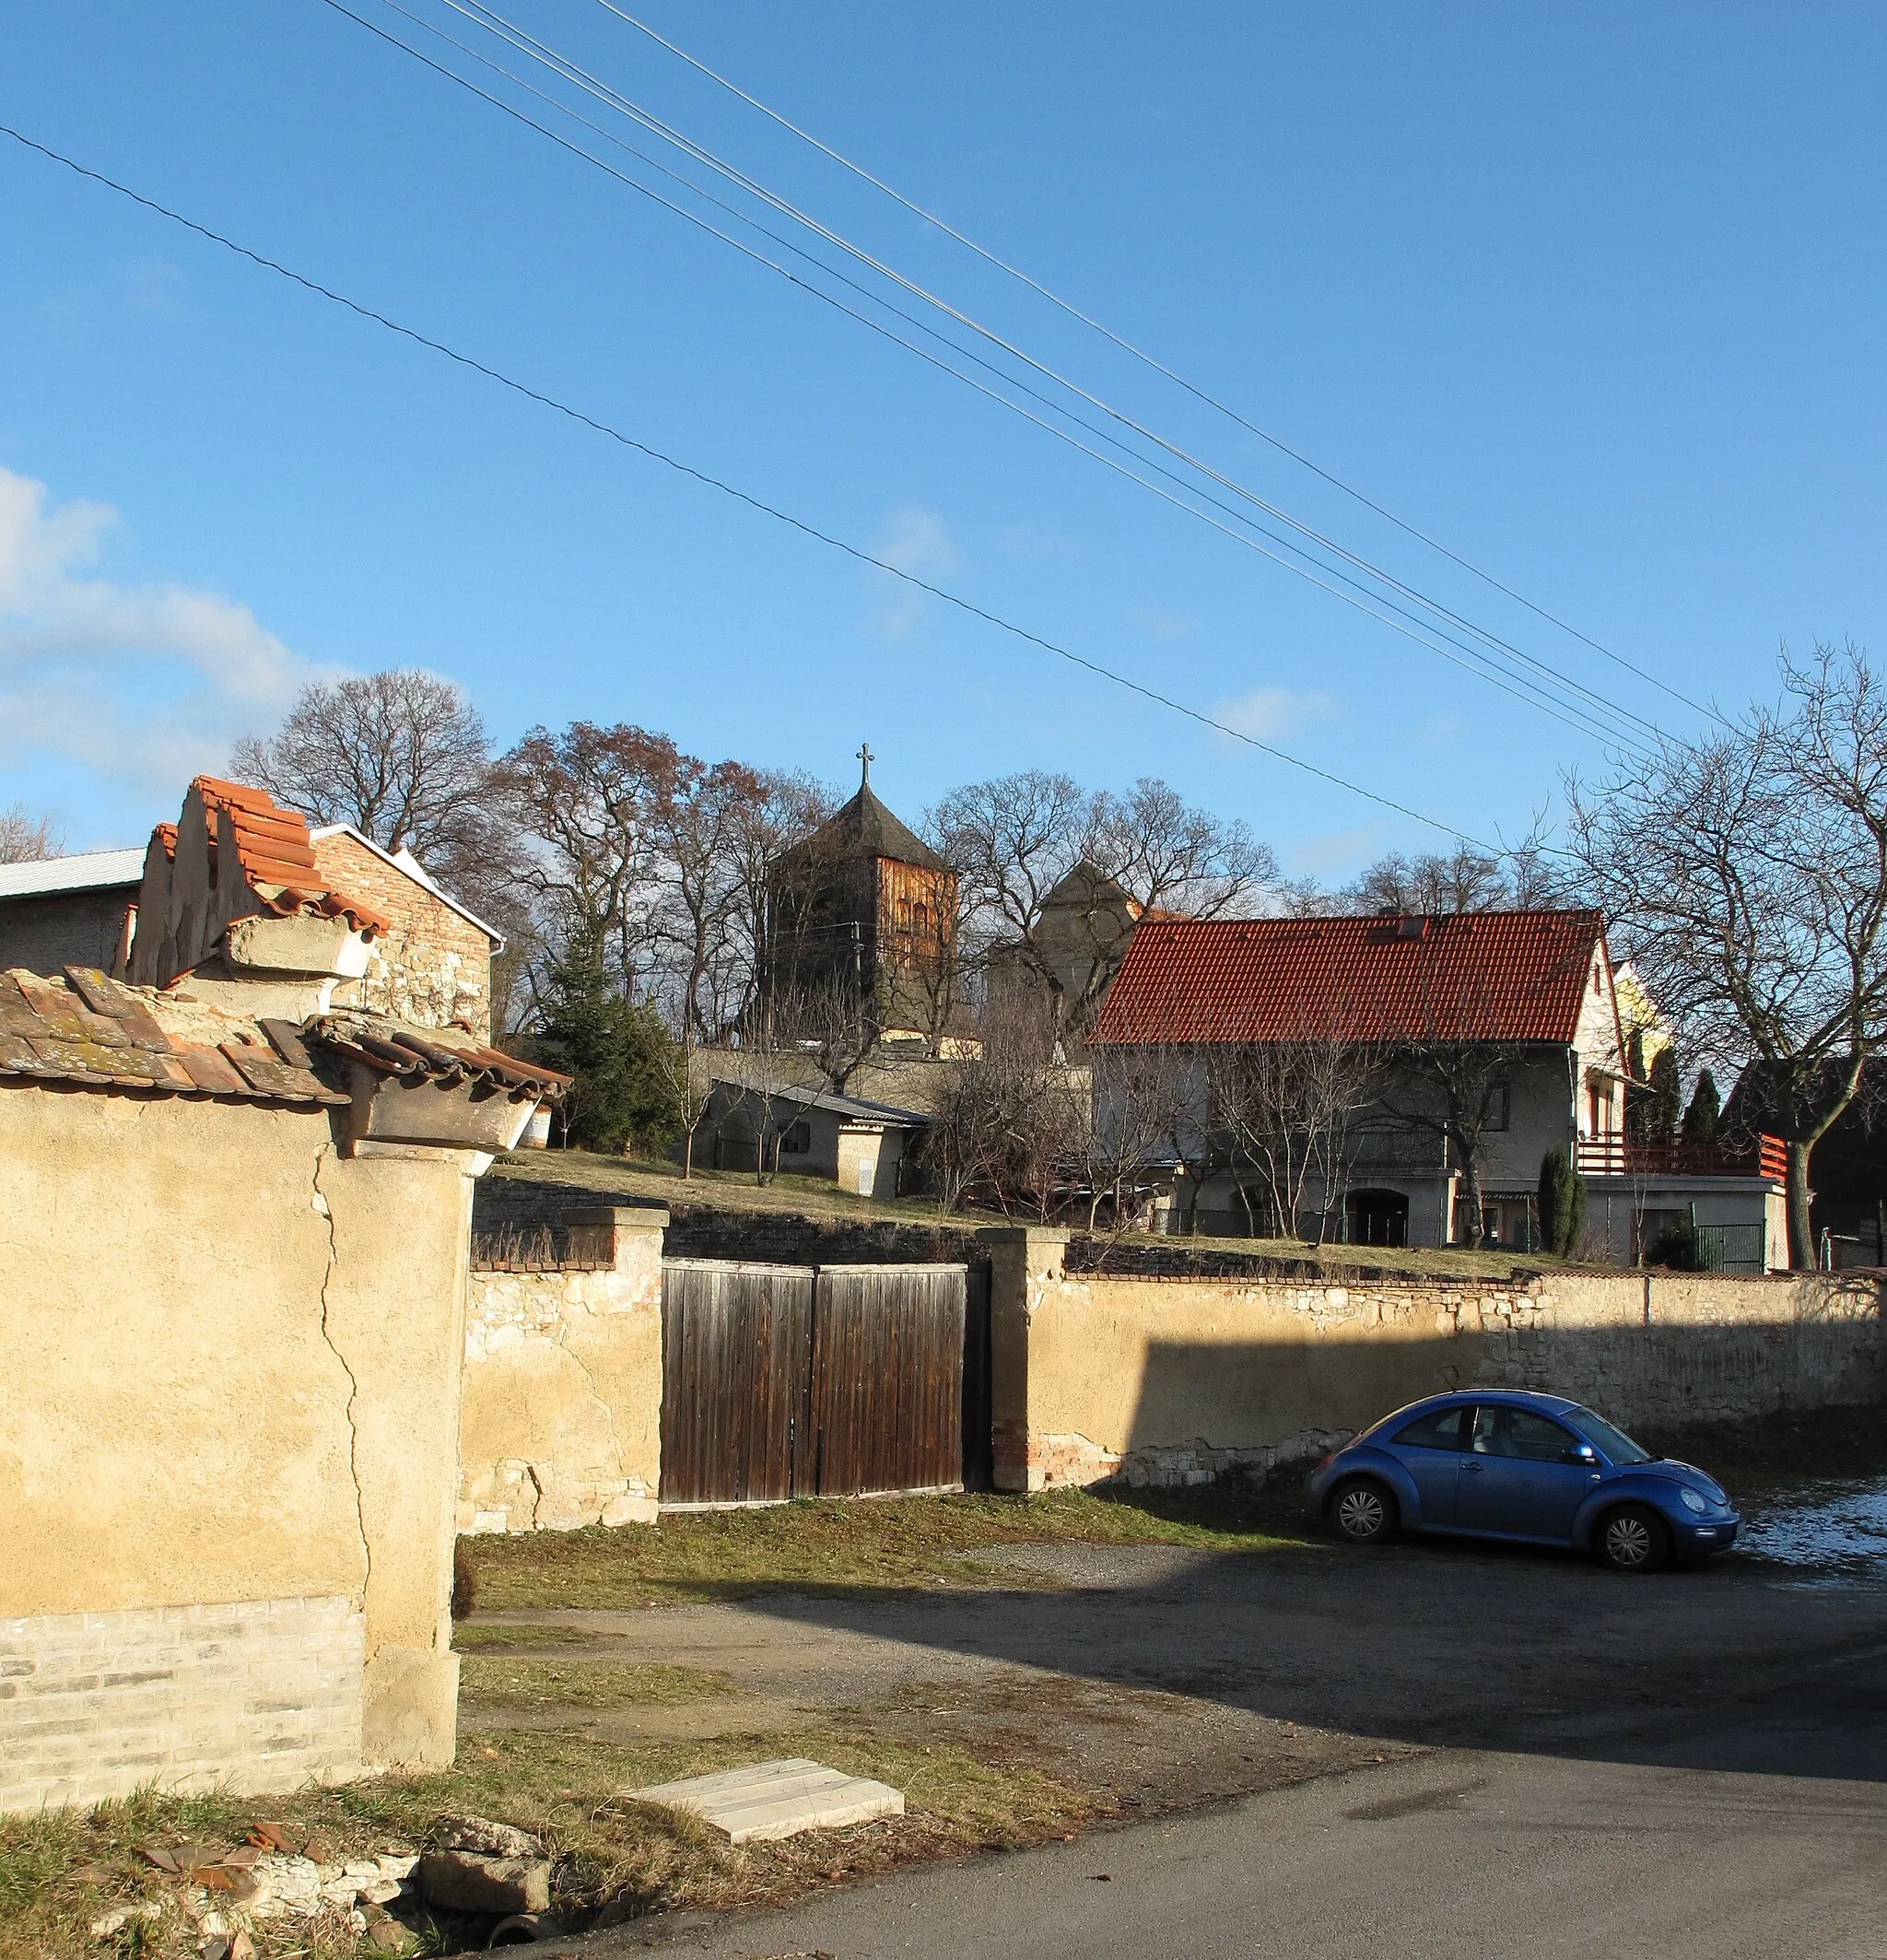 Photo showing: Roofs of the houses in Řisuty village, Kladno District, Czech Republic.